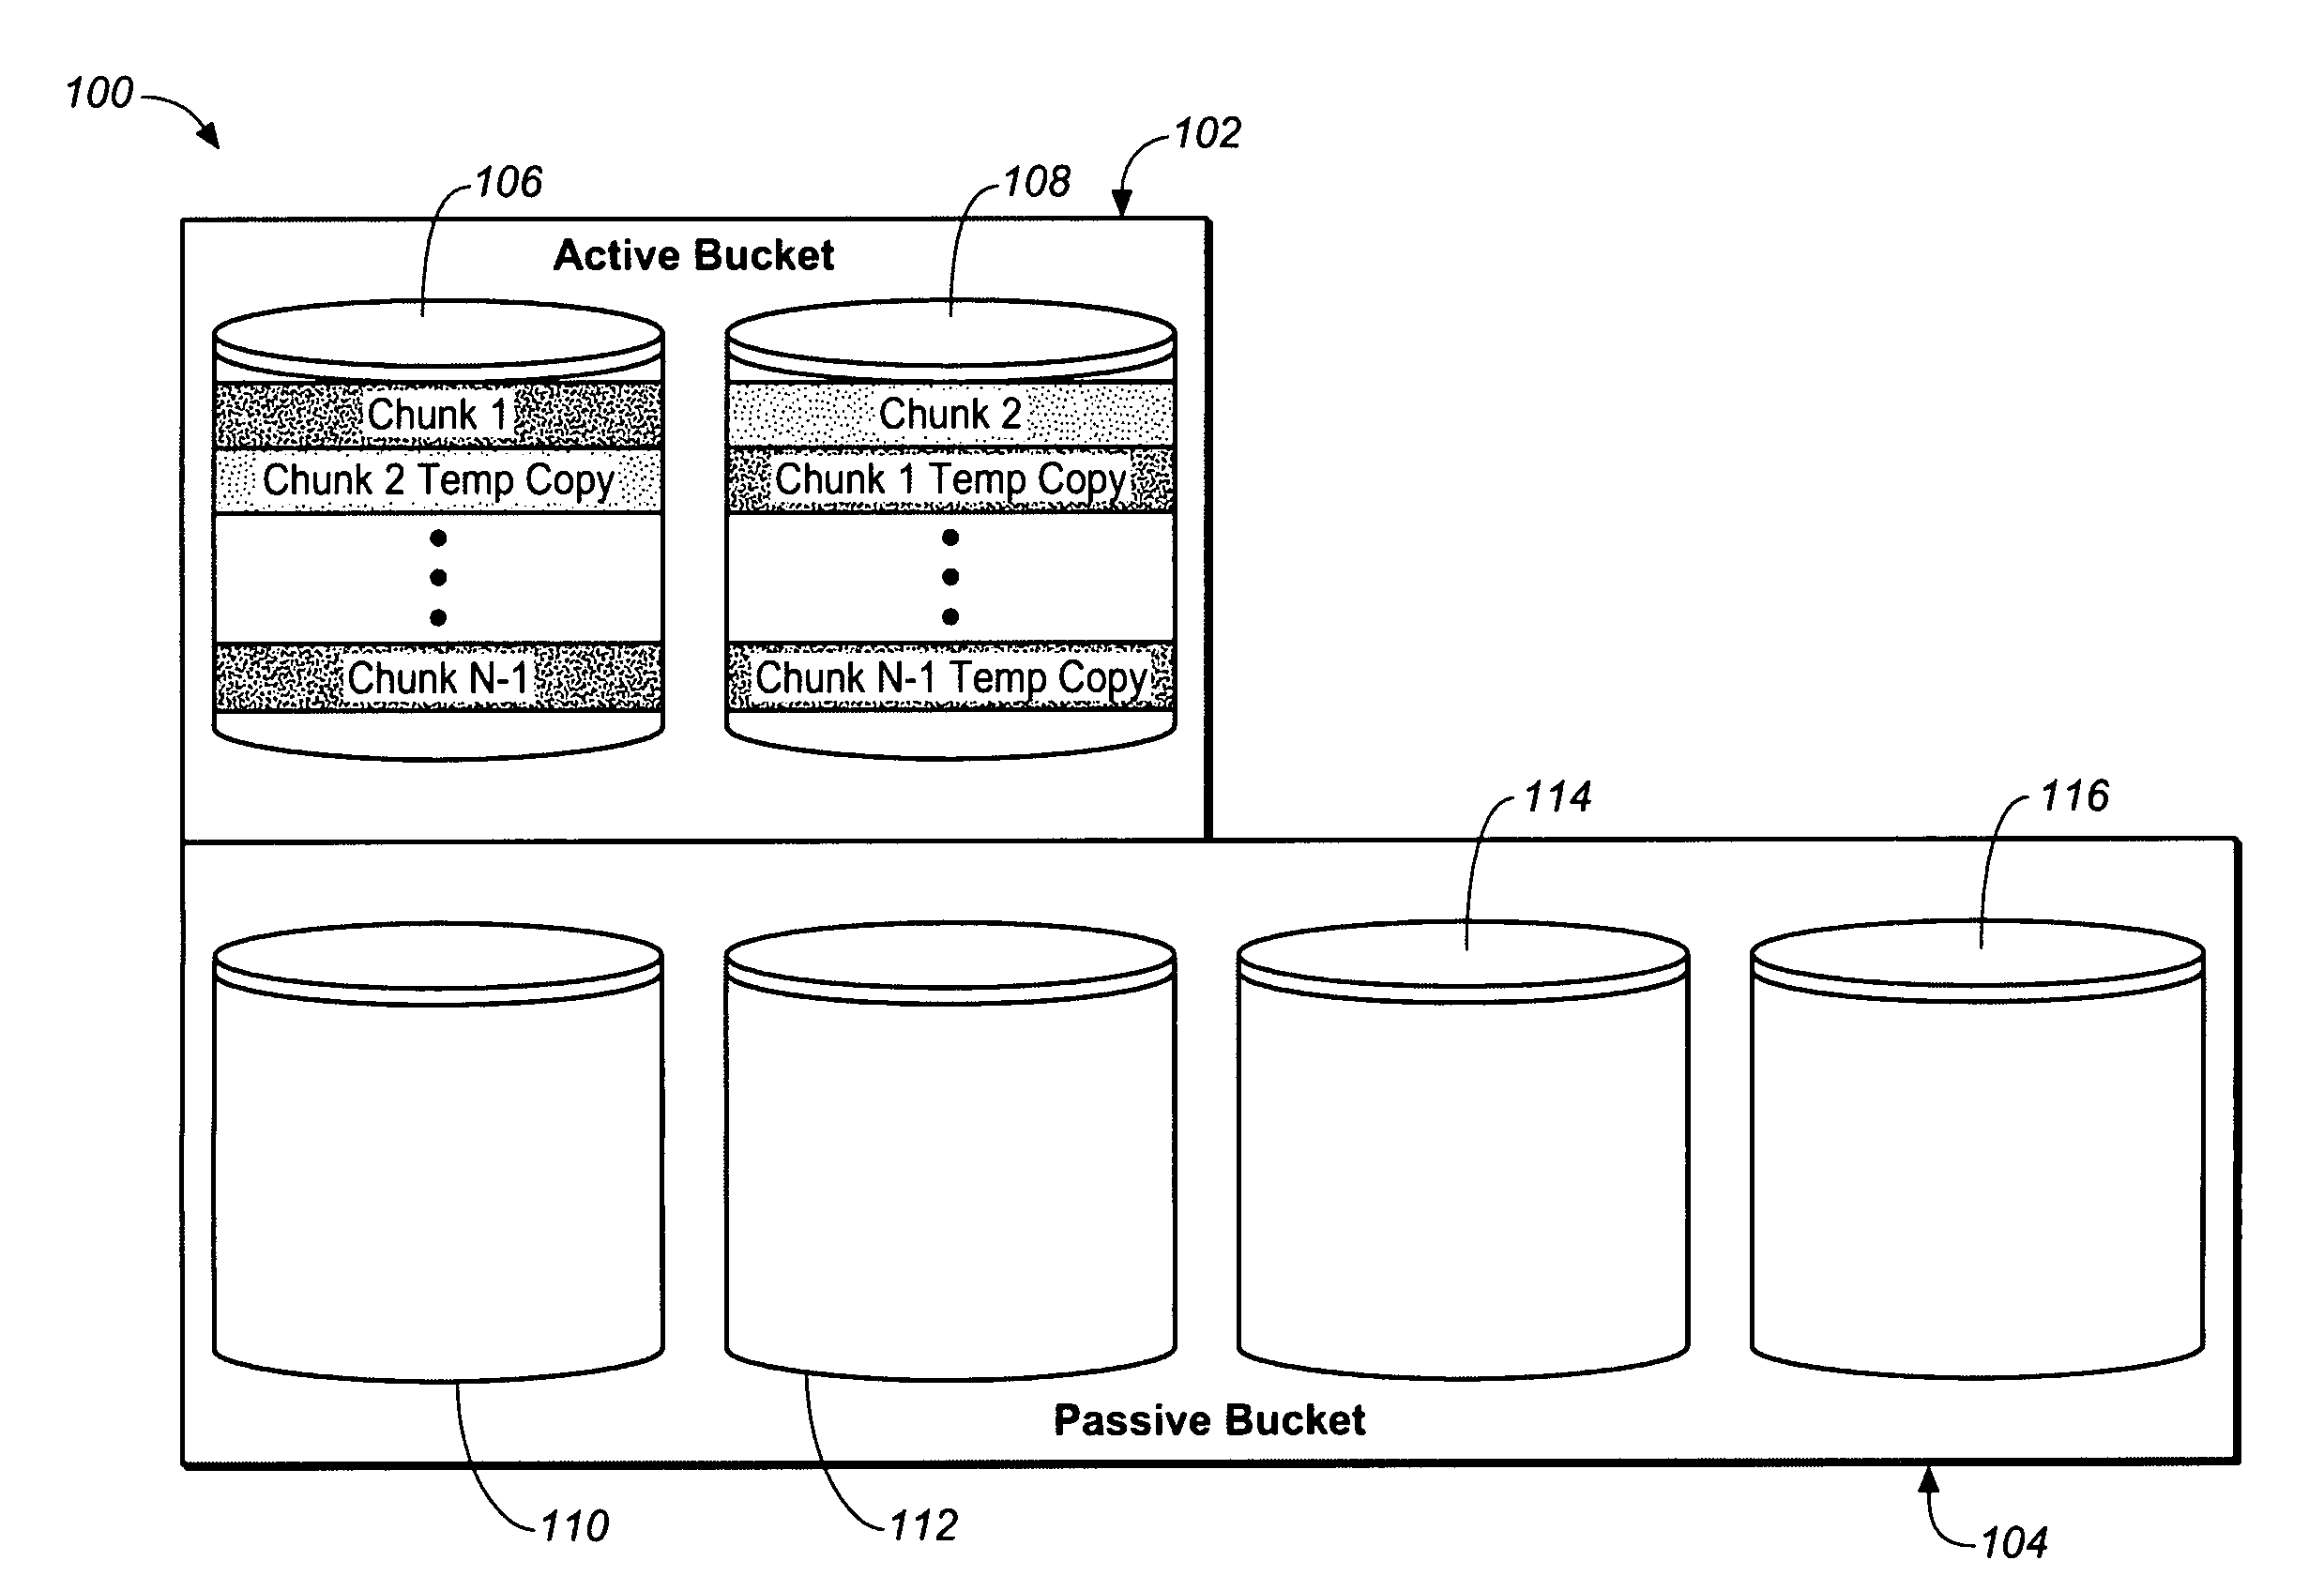 Method for utilizing mirroring in a data storage system to promote improved data accessibility and improved system efficiency